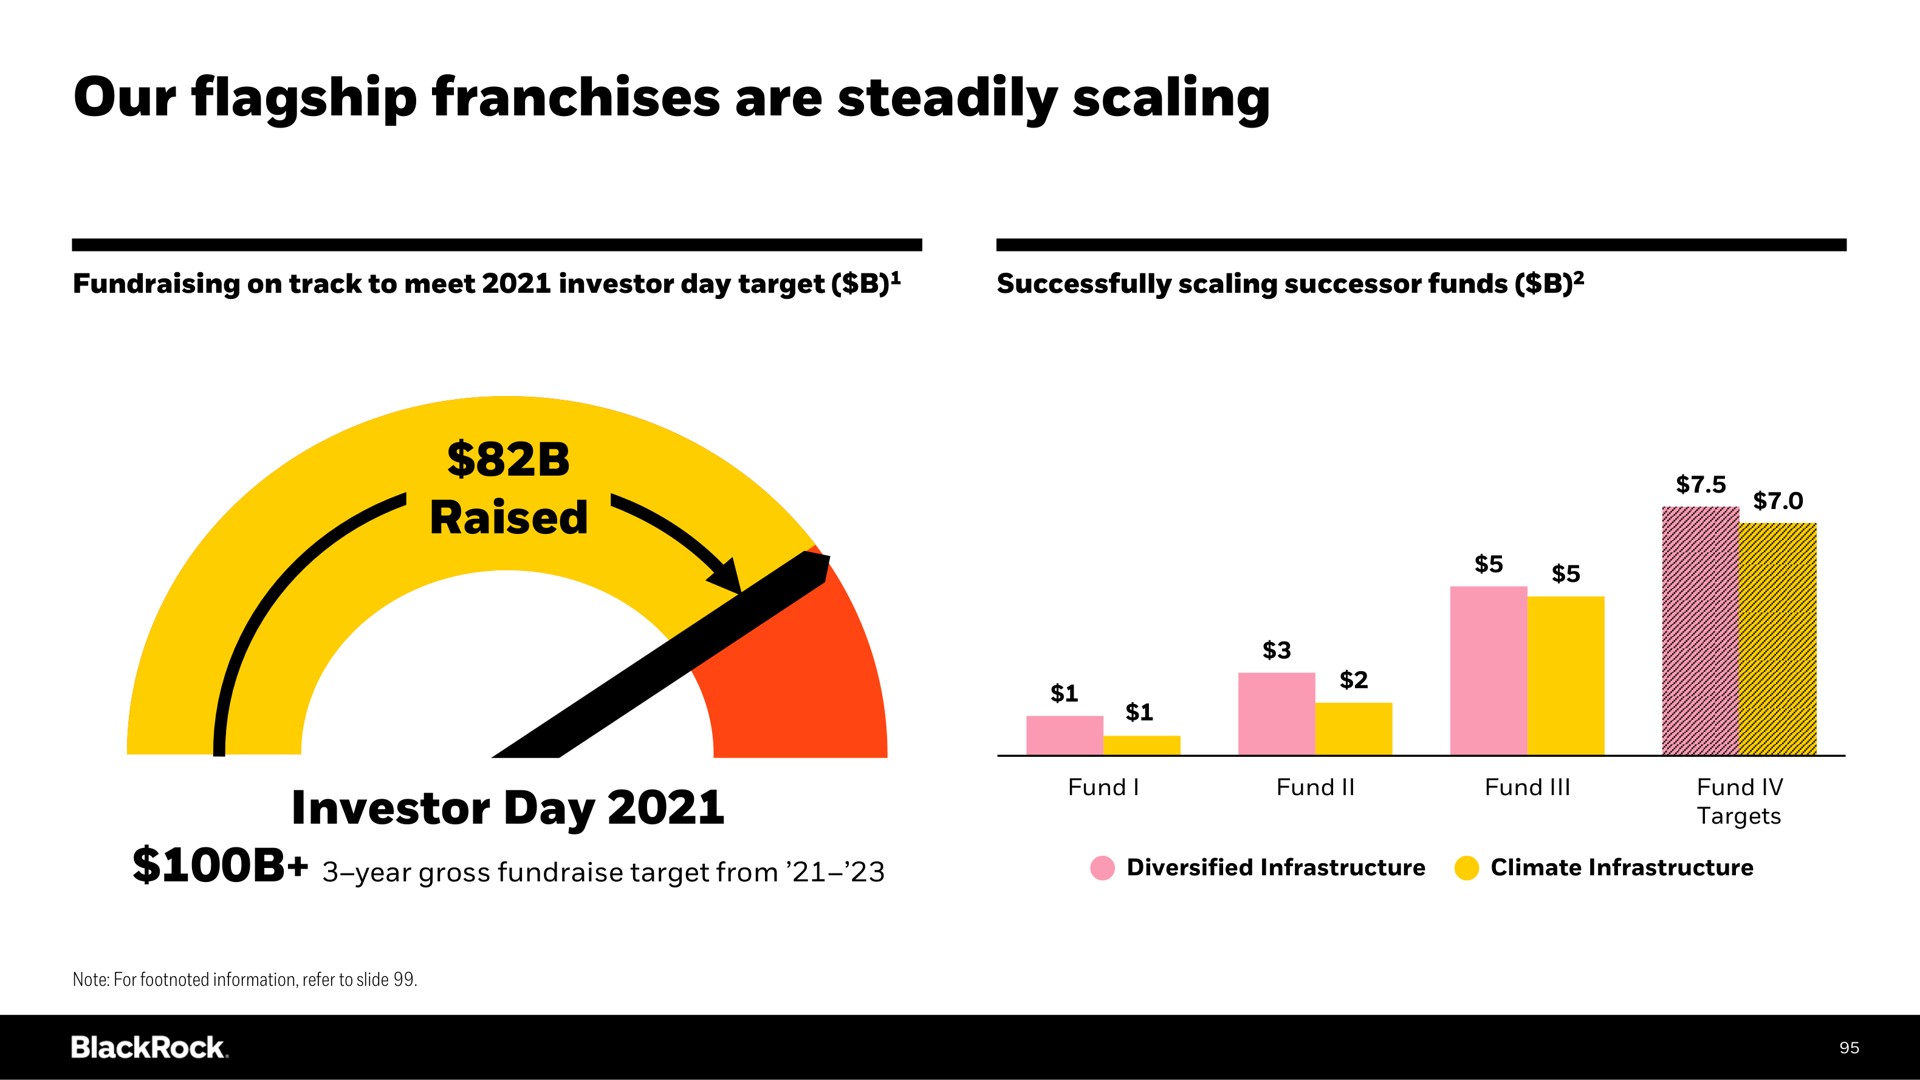 our flagship franchises are steadily scaling raised investor day targets | BlackRock